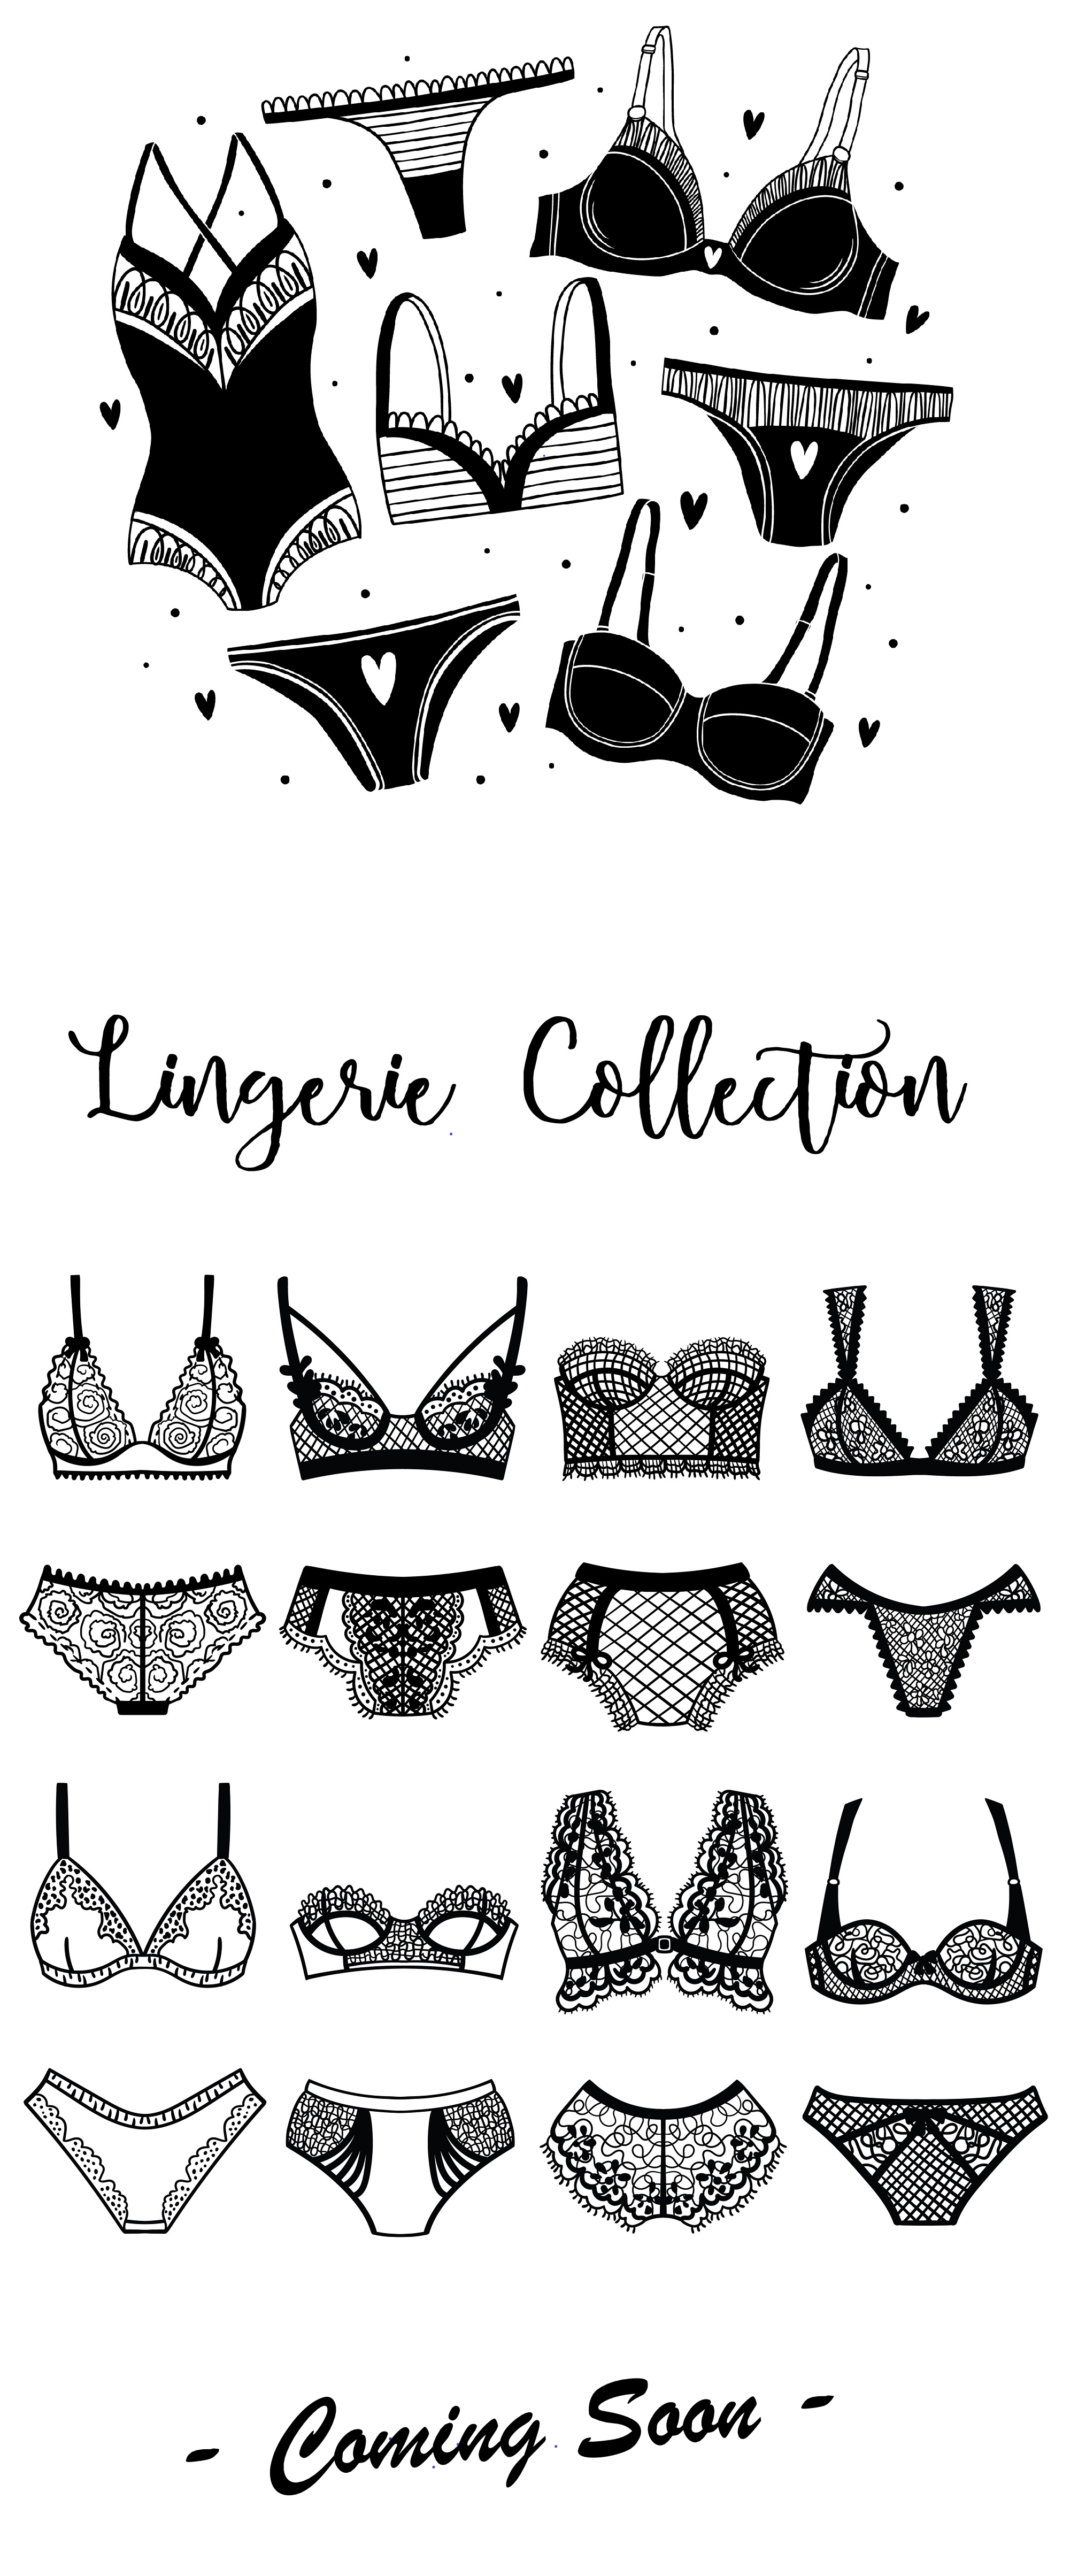 Lingerie collection coming soon